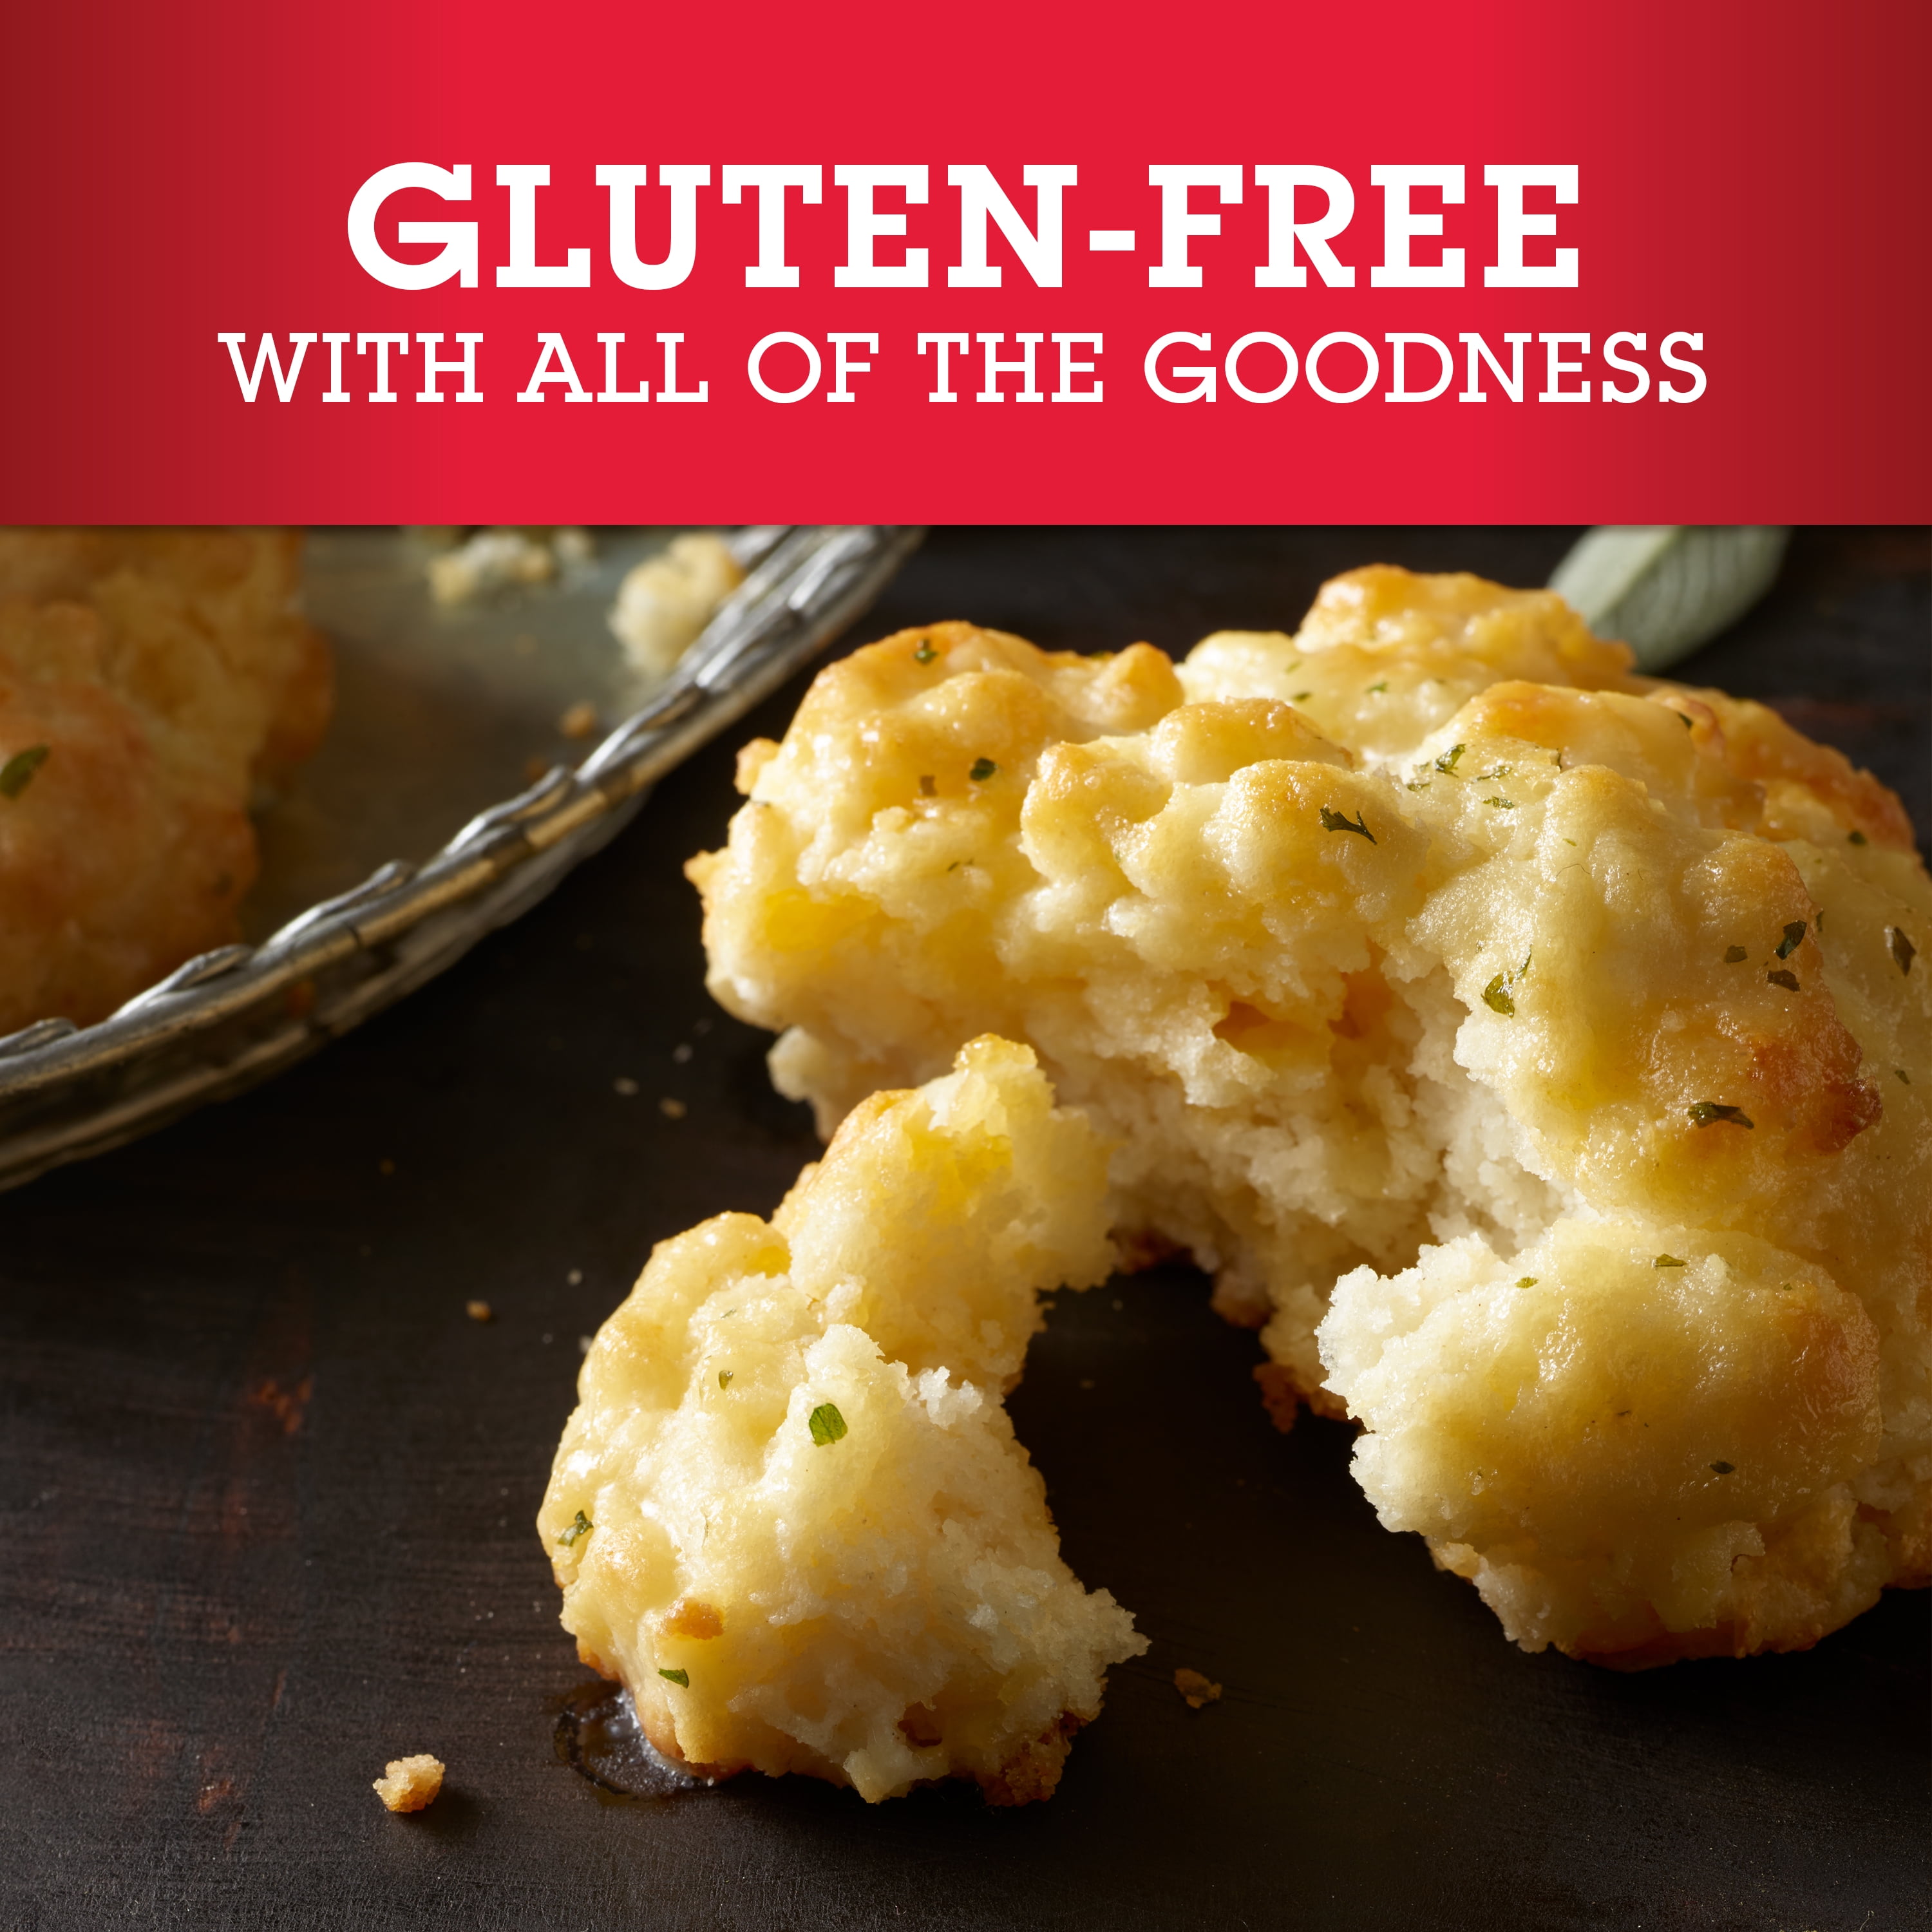 Red Lobster Gluten Free Cheddar Bay Biscuit Mix Makes 12